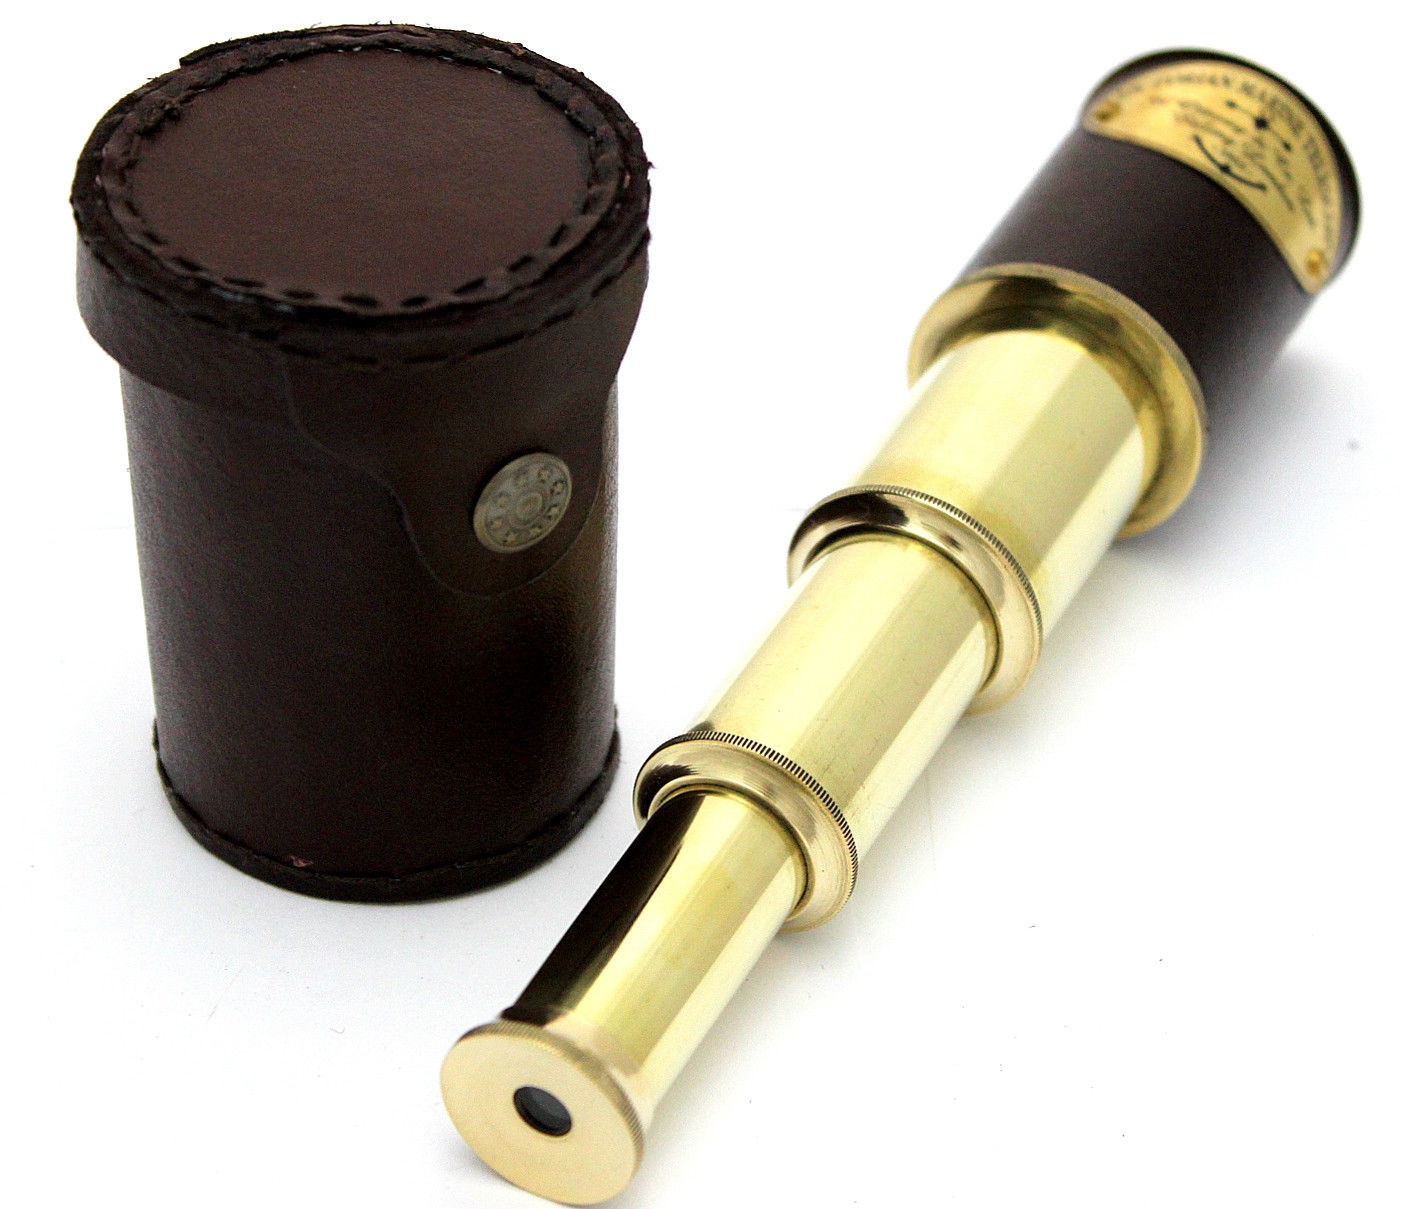 Pirates Spyglass Solid Brass Victorian Marine Telescope with Leather case - 8"